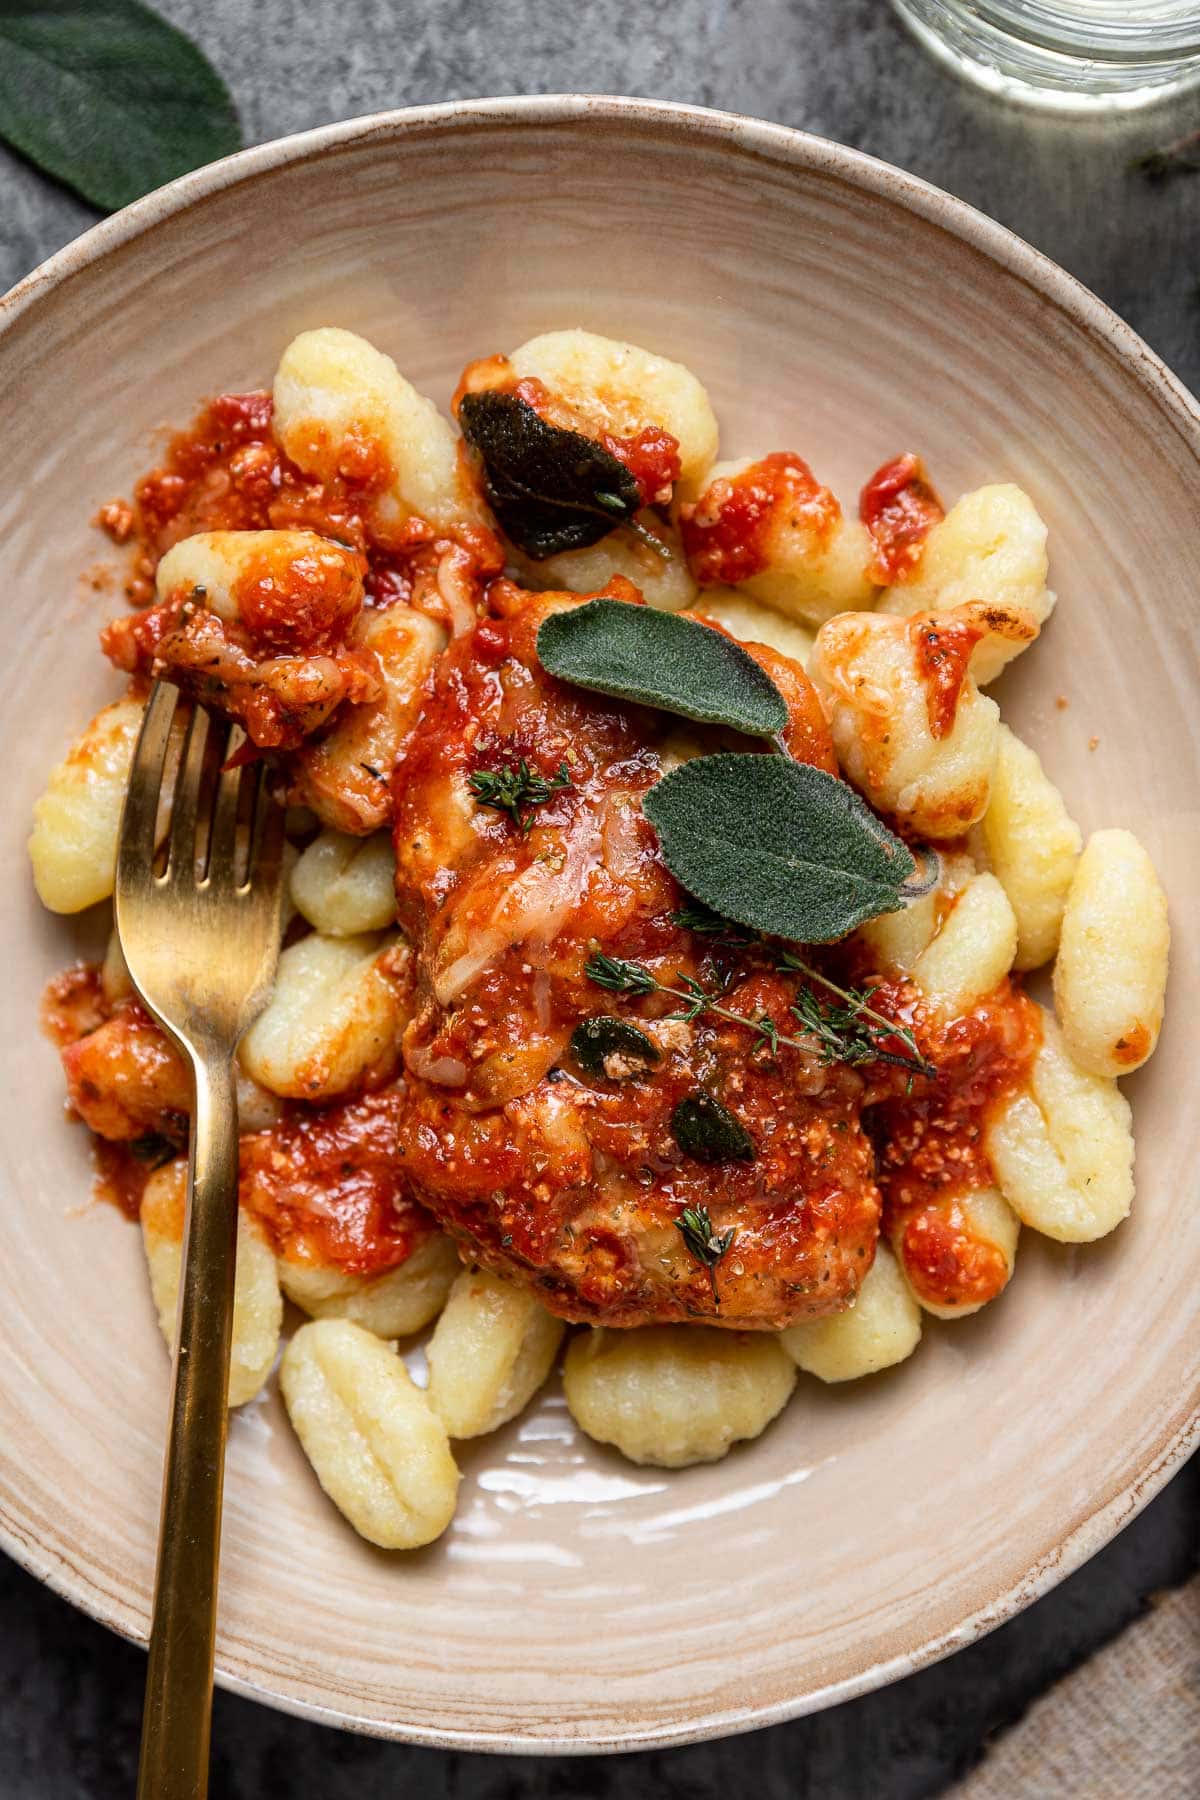 Baked Cheesy Italian Chicken plated over gnocchi with fork holding up bite